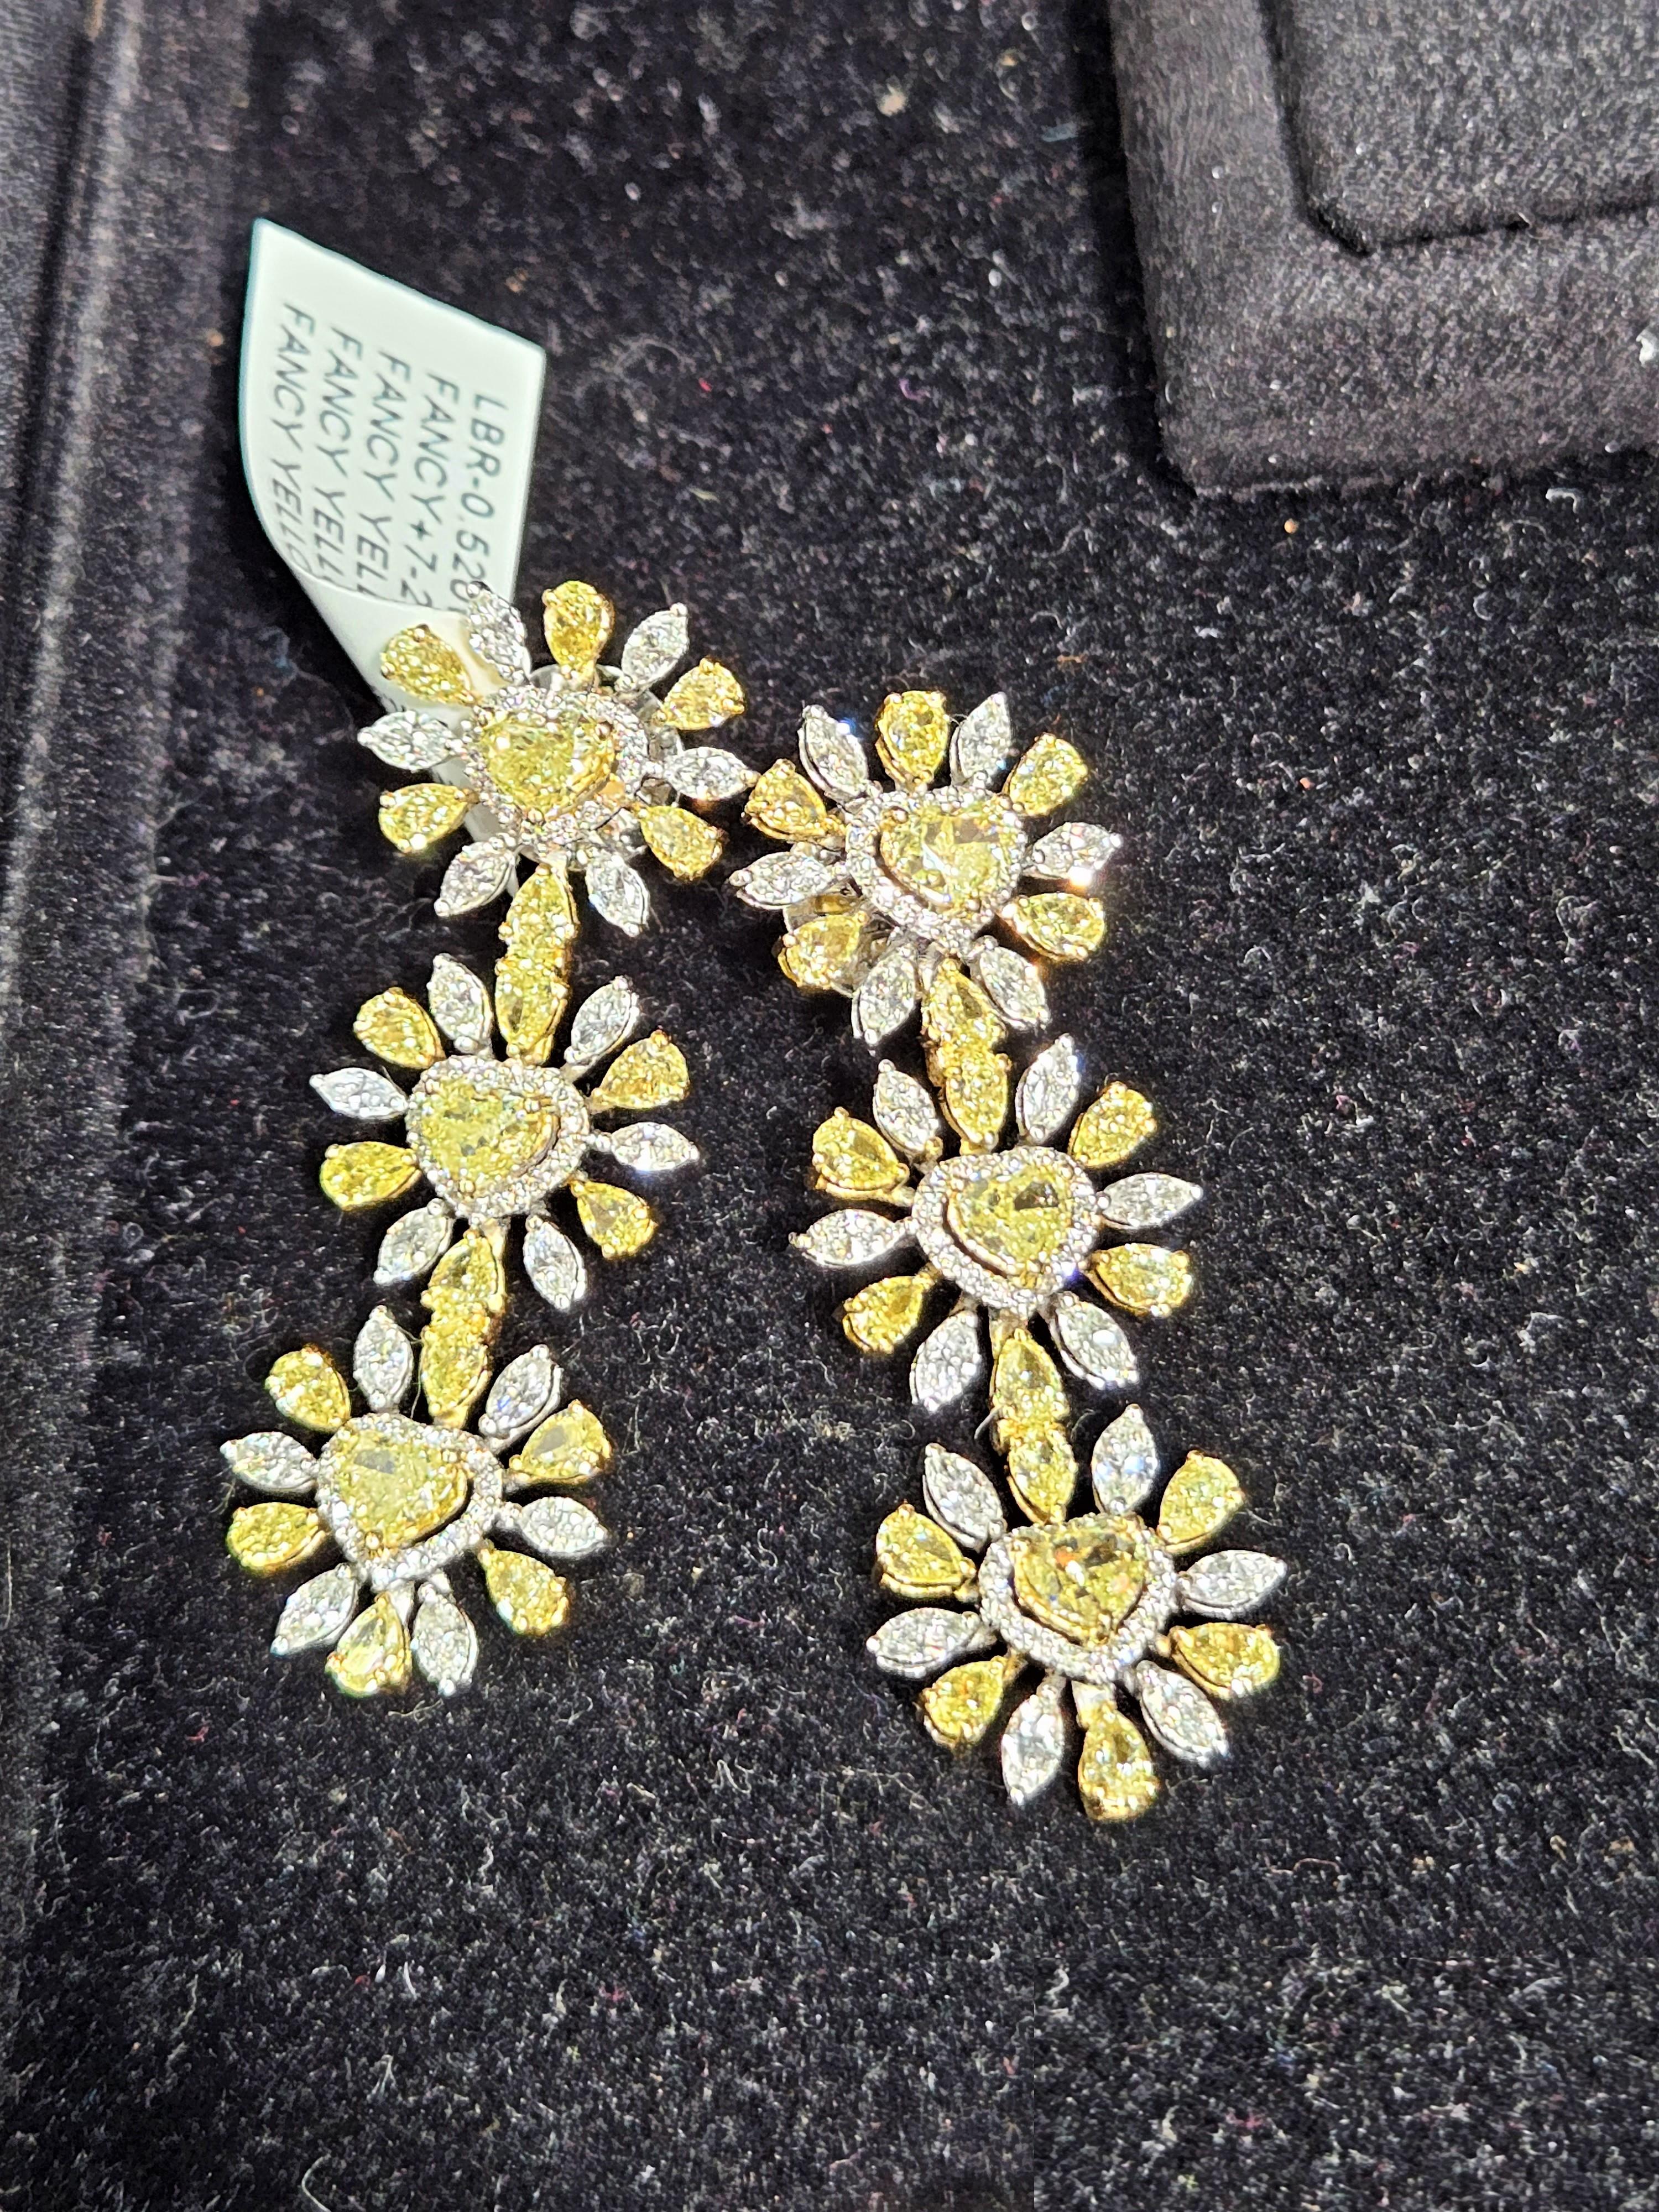 The Following Item we are offering is this Beautiful Rare Important Gold Large Glittering Heart Diamond Dangle Earrings. These Magnificent Earrings are comprised of approx 9CTS Magnificent Rare Gorgeous Fancy Glittering Heart Shaped Yellow Diamonds